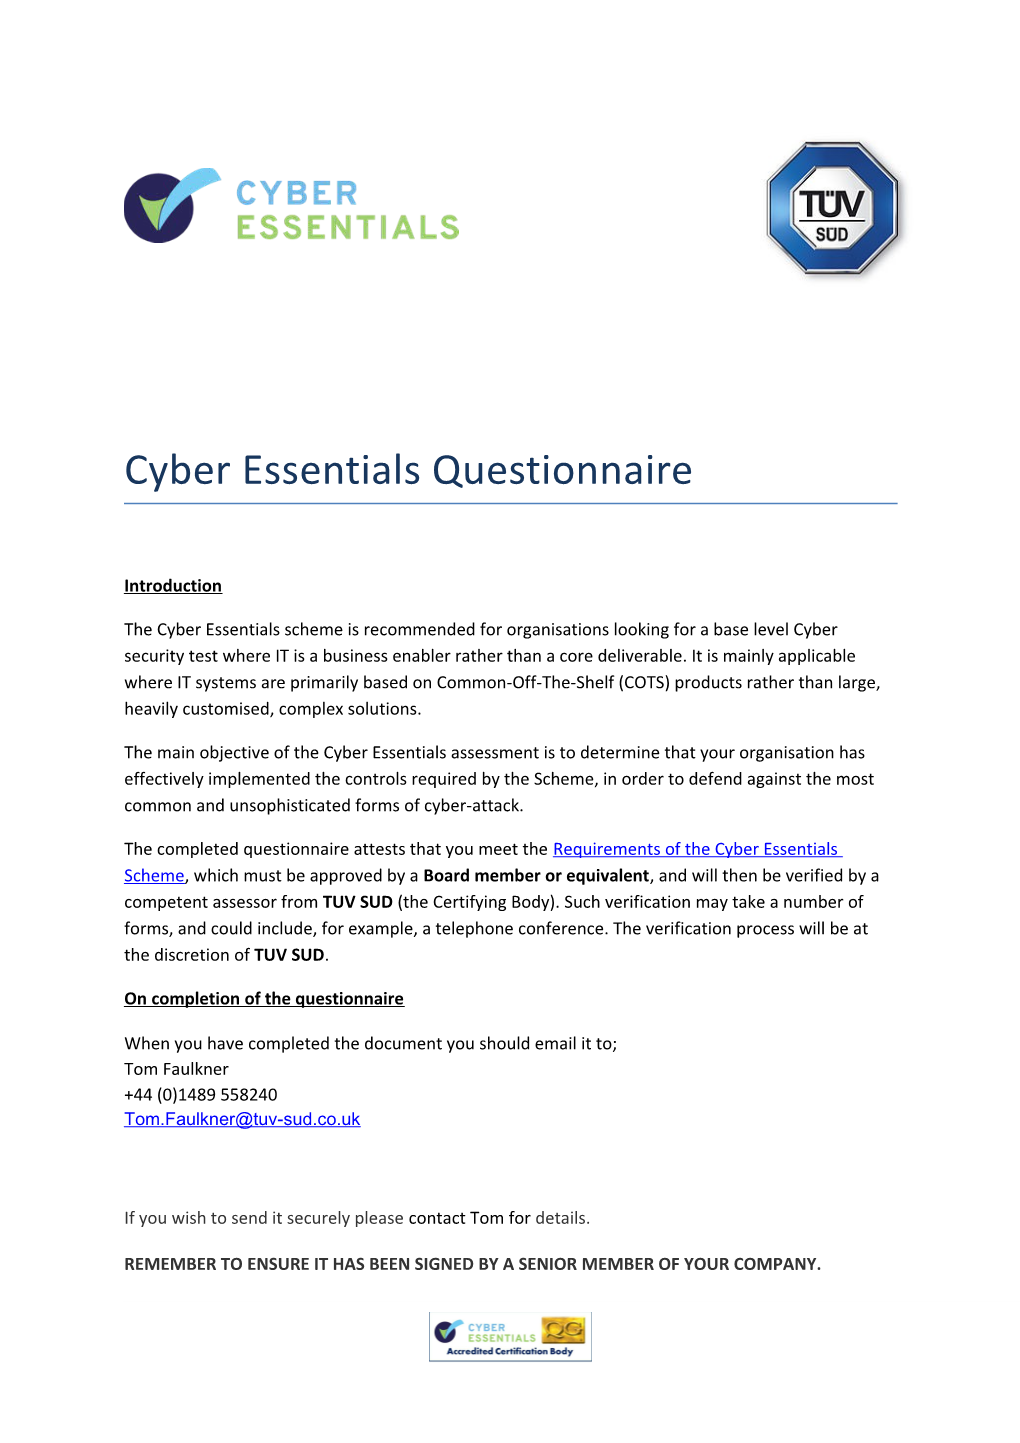 Cyber Essentials Questionnaire